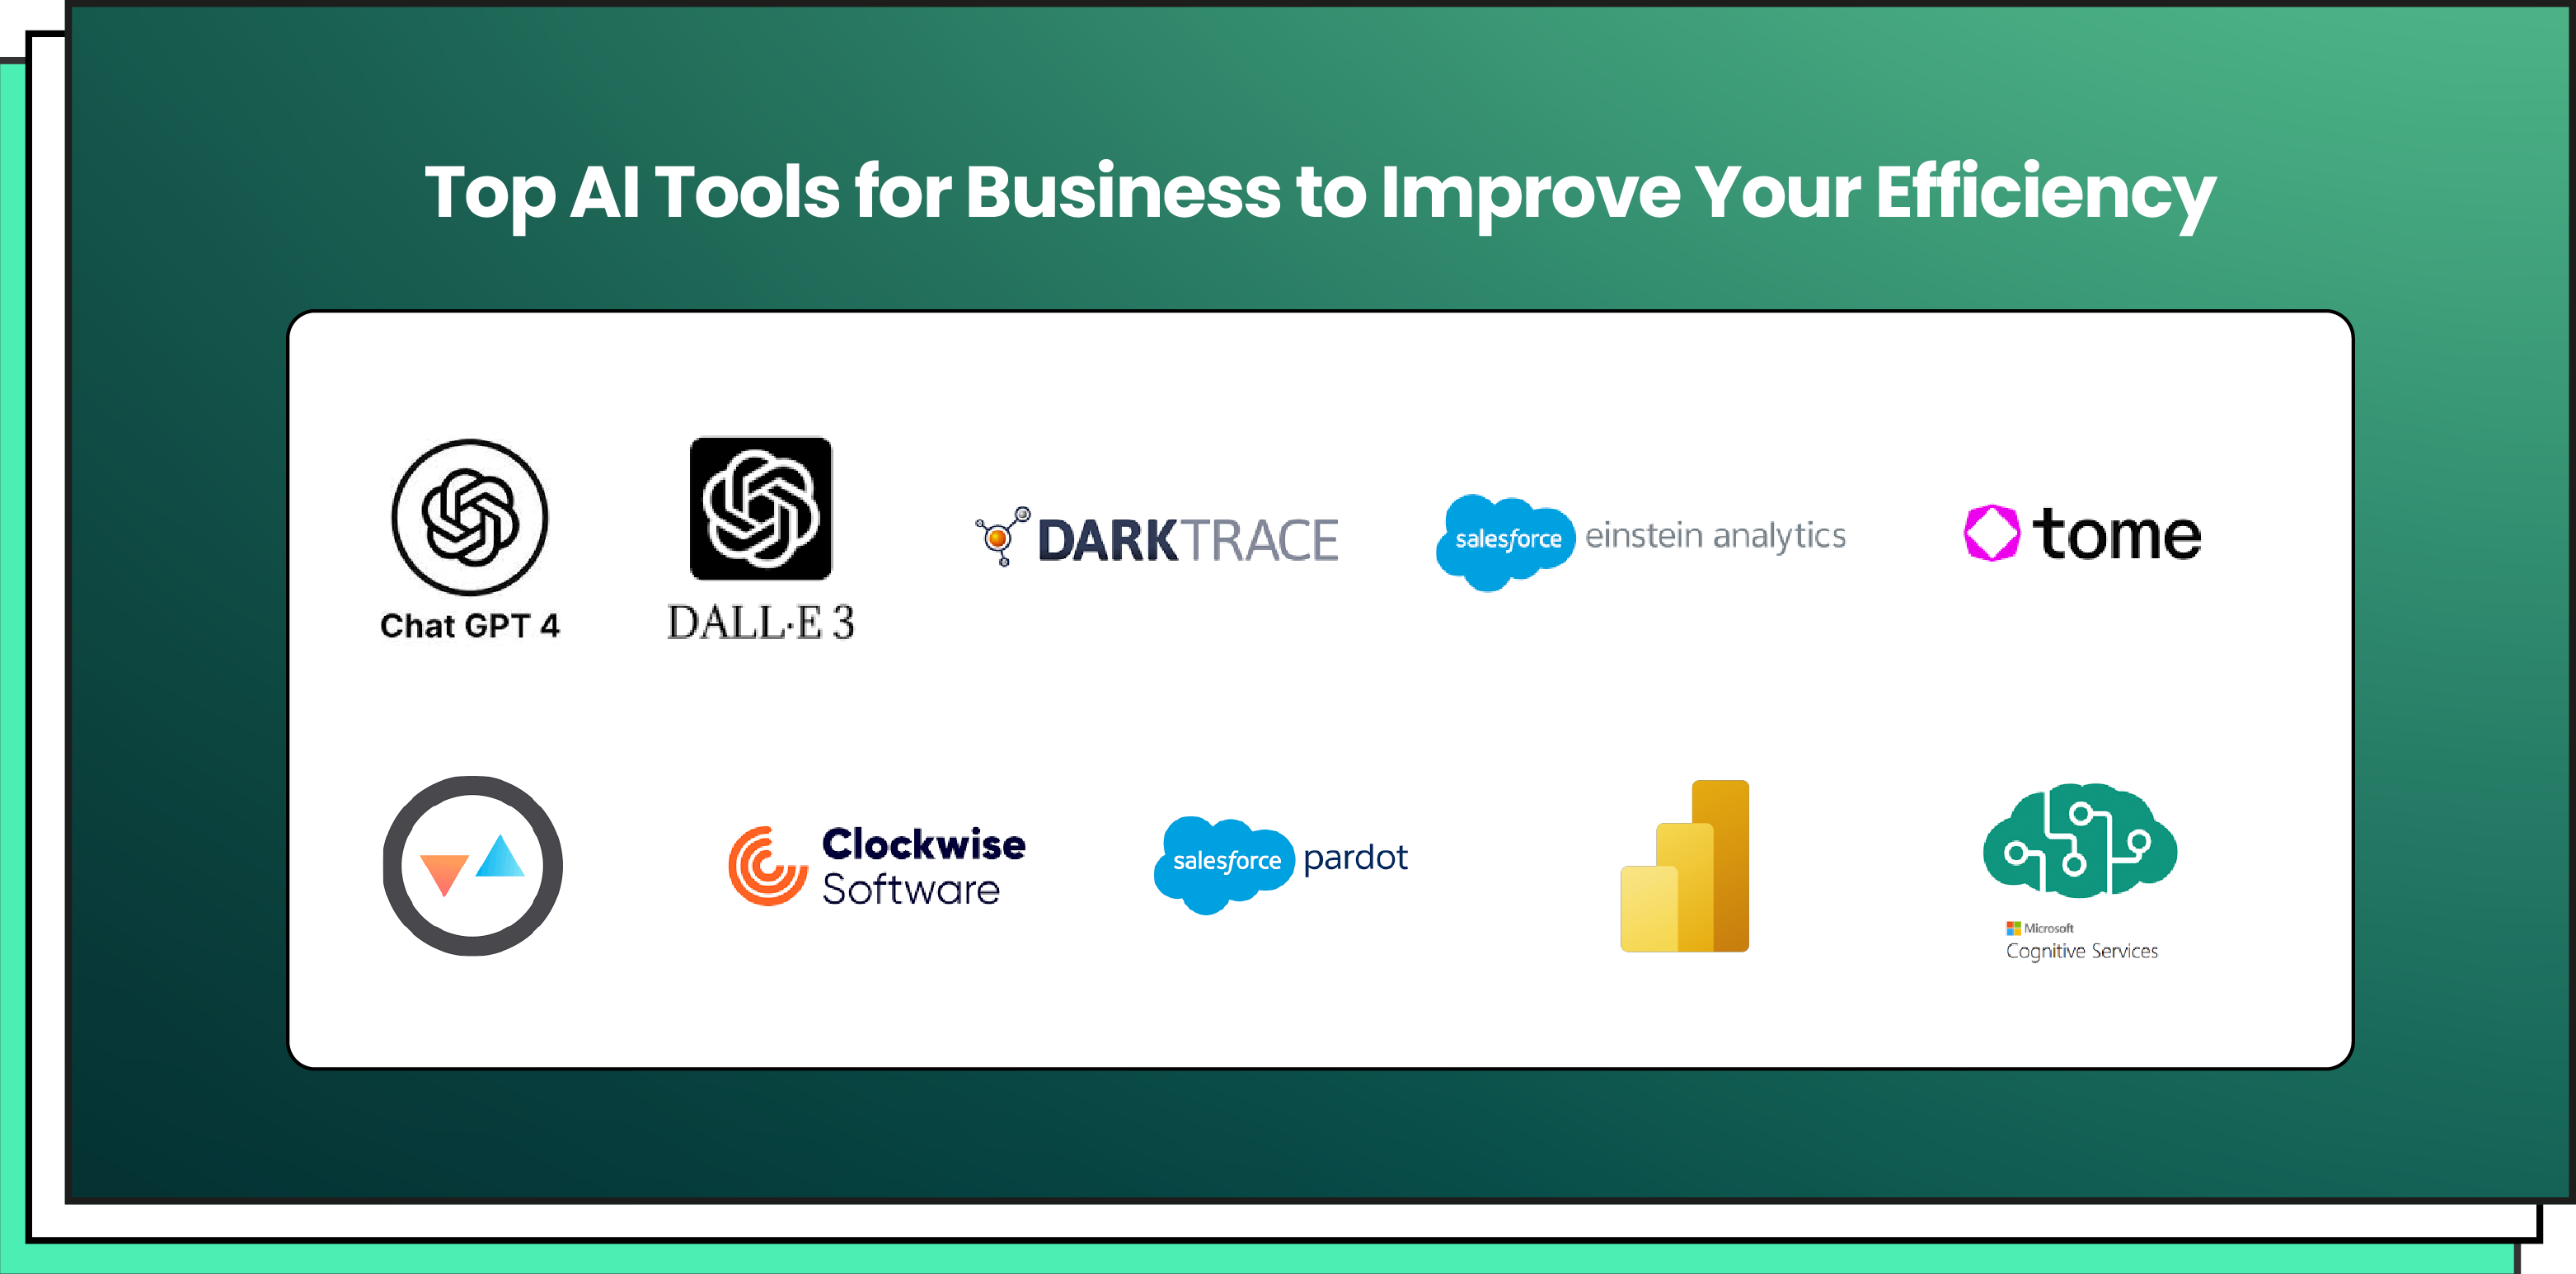 Top AI Tools for Business